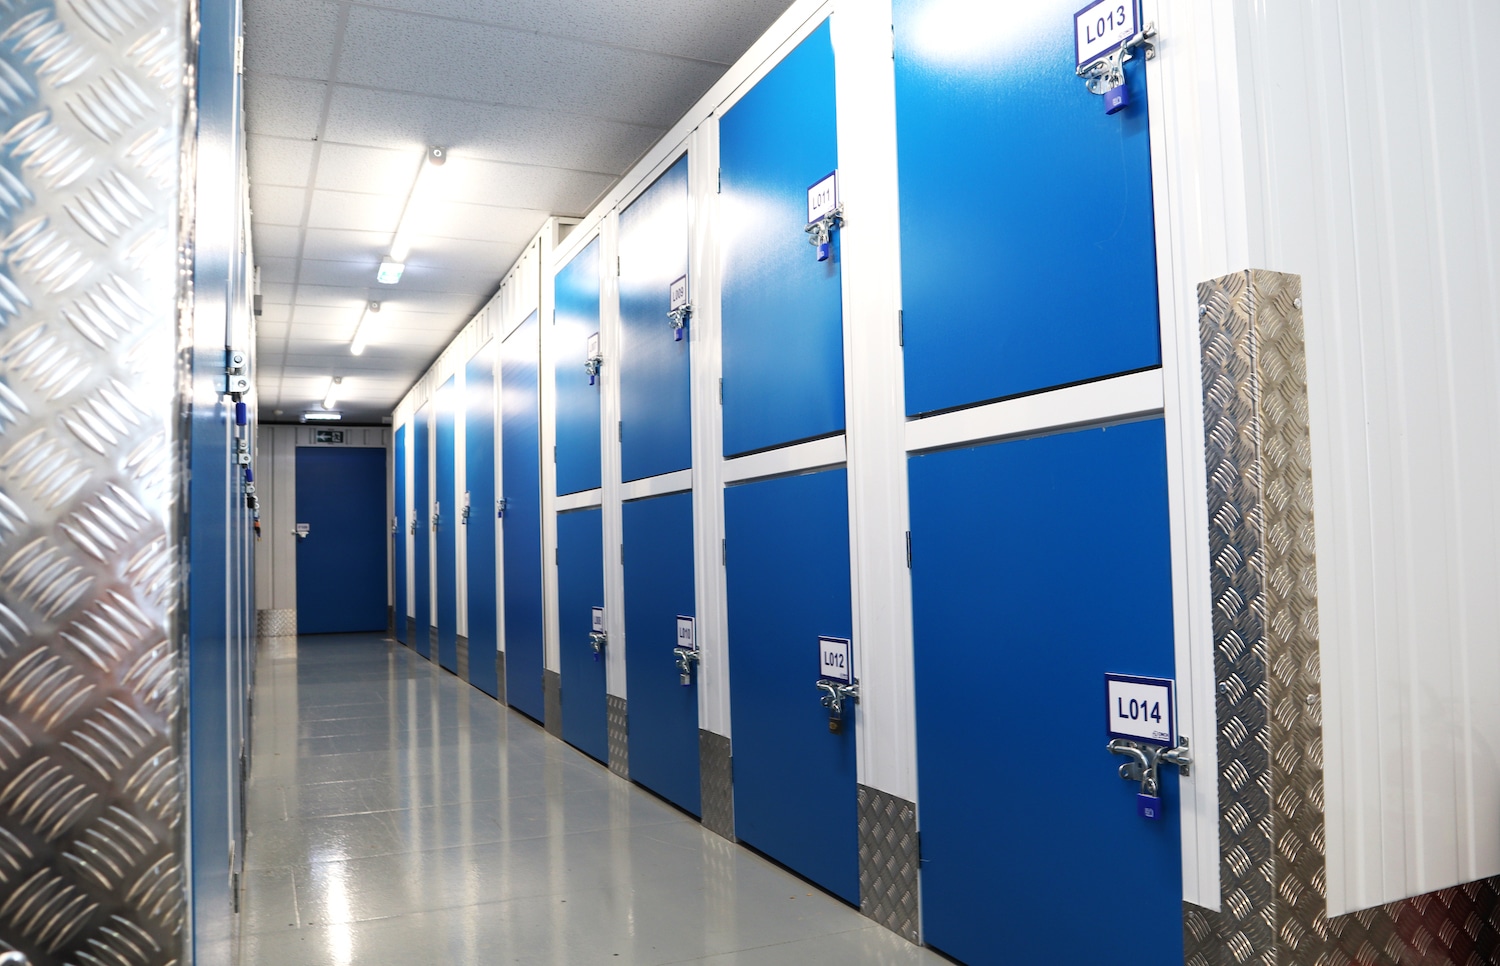 Short term vs long term storage. Image shows two-tiers of small storage units on a white wall with blue doors.